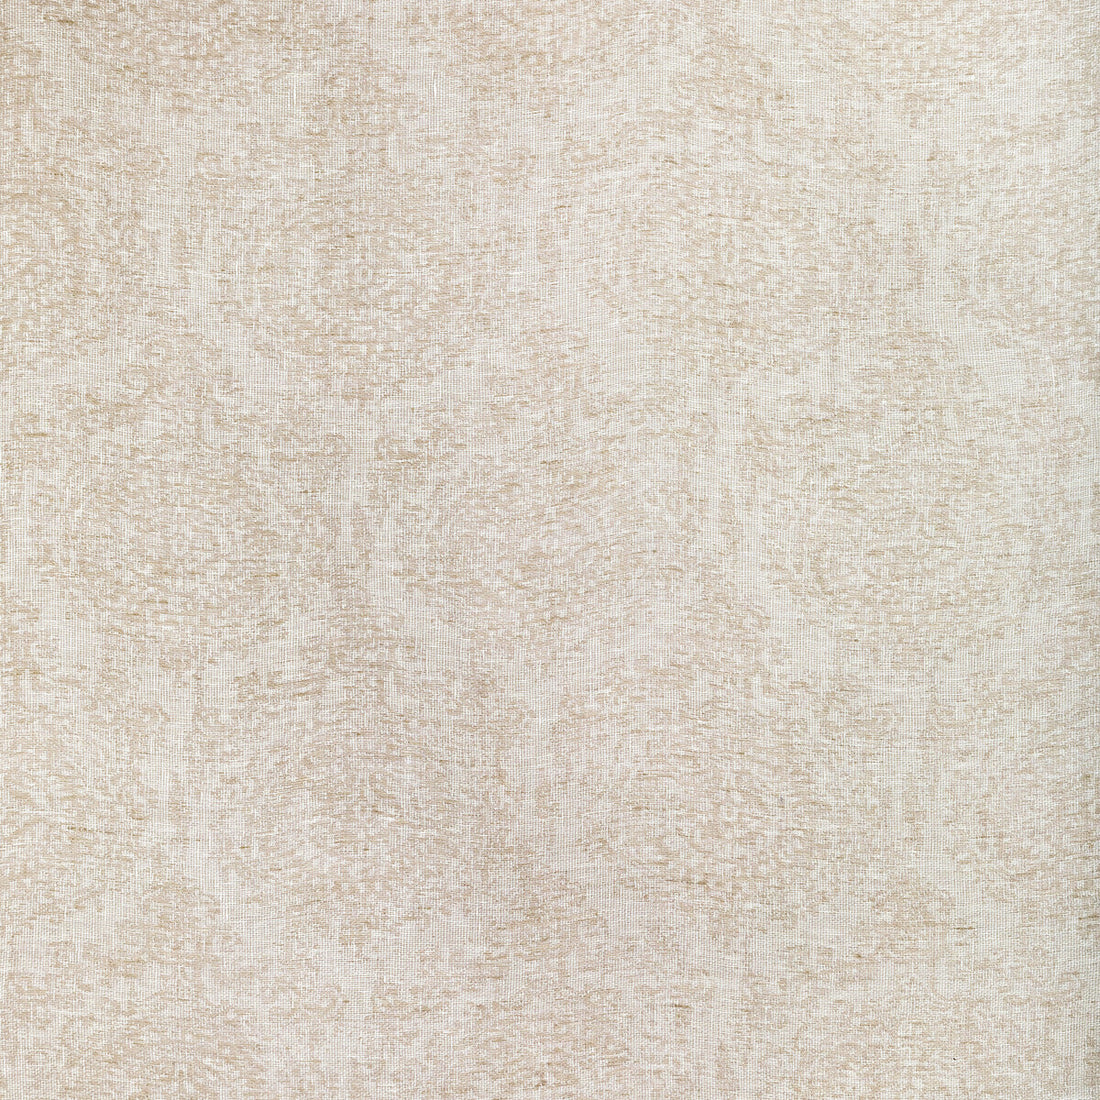 Romona Sheer fabric in sand color - pattern 2021120.16.0 - by Lee Jofa in the Summerland collection